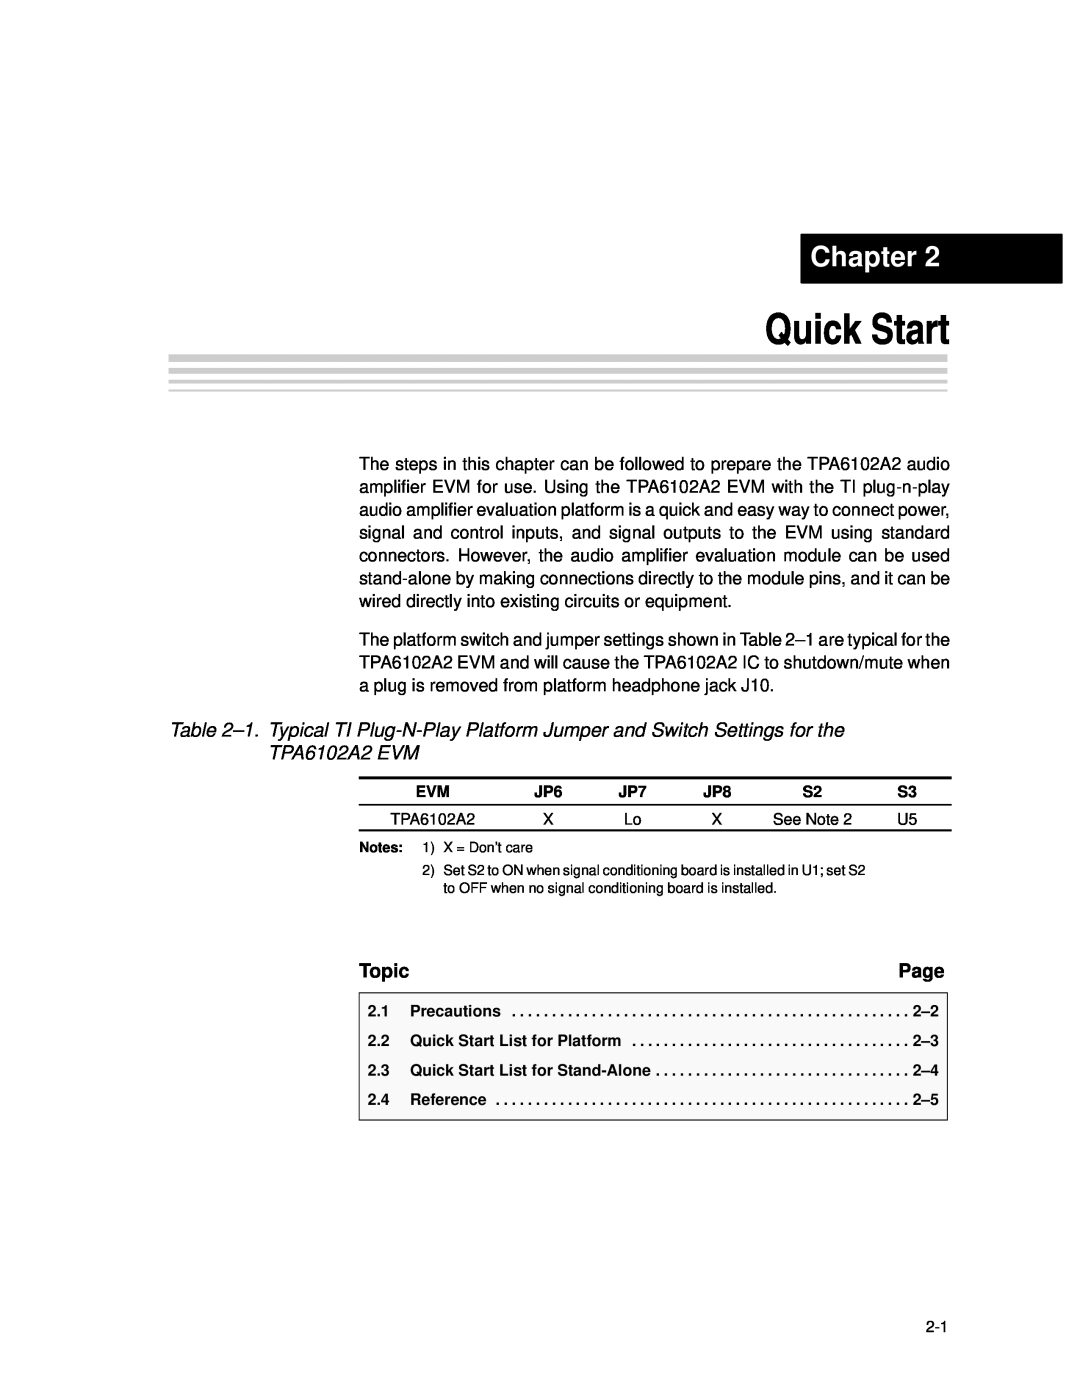 Texas Instruments TPA6102A2 manual Quick Start, Chapter, Page, Topic 